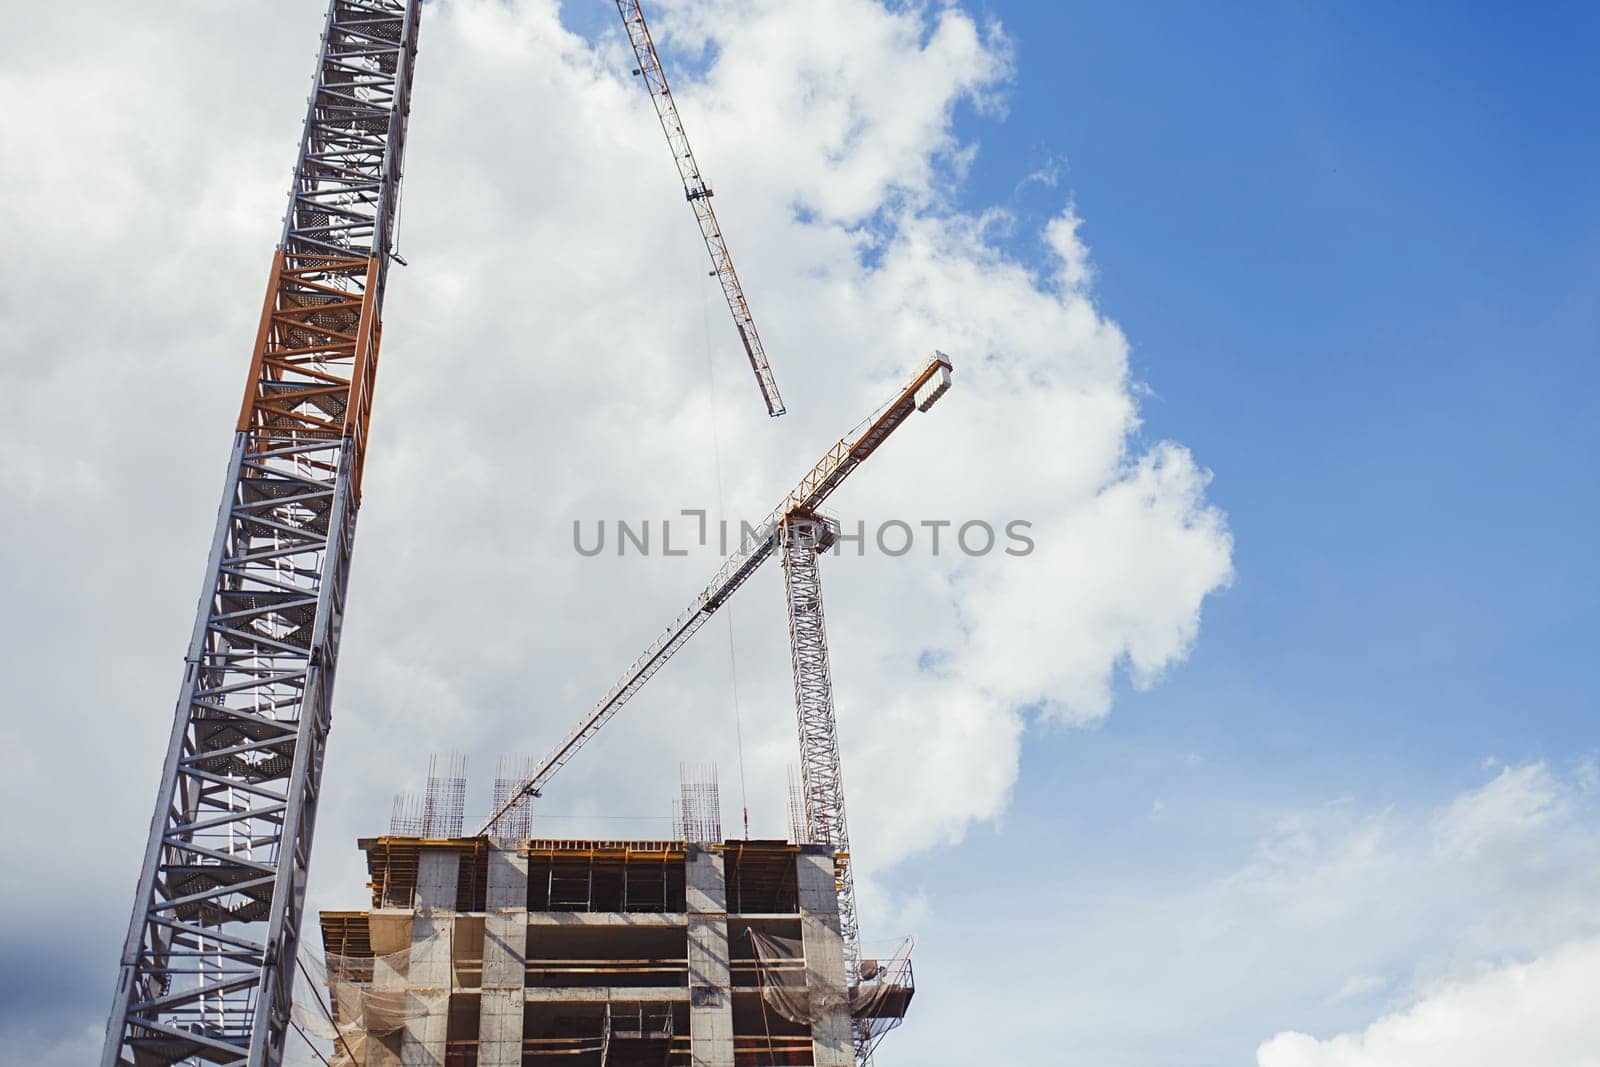 Construction site with cranes on blue sky background